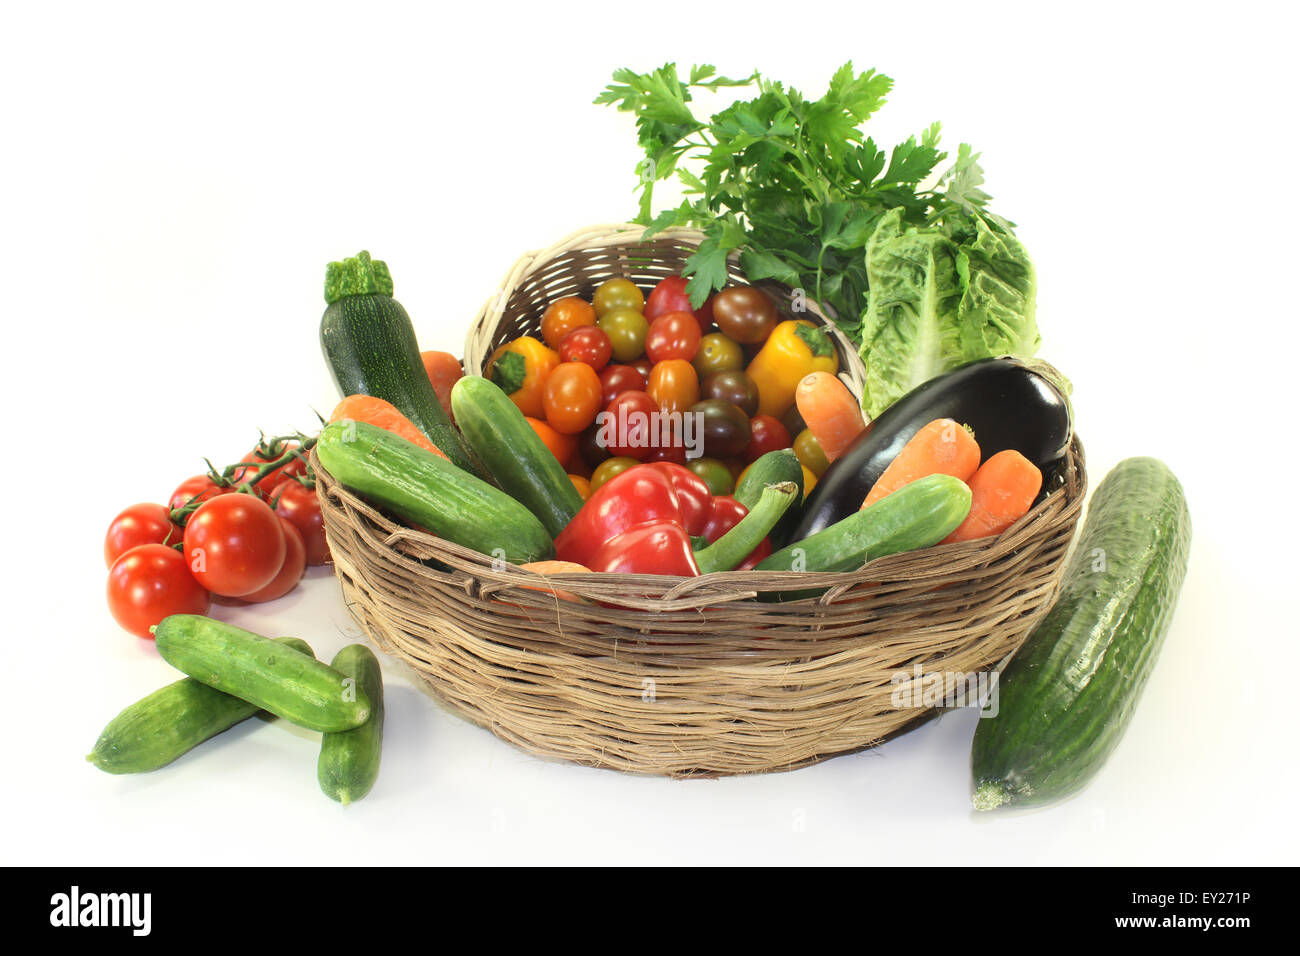 Types Of Vegetables Stock Photos & Types Of Vegetables Stock Images - Alamy